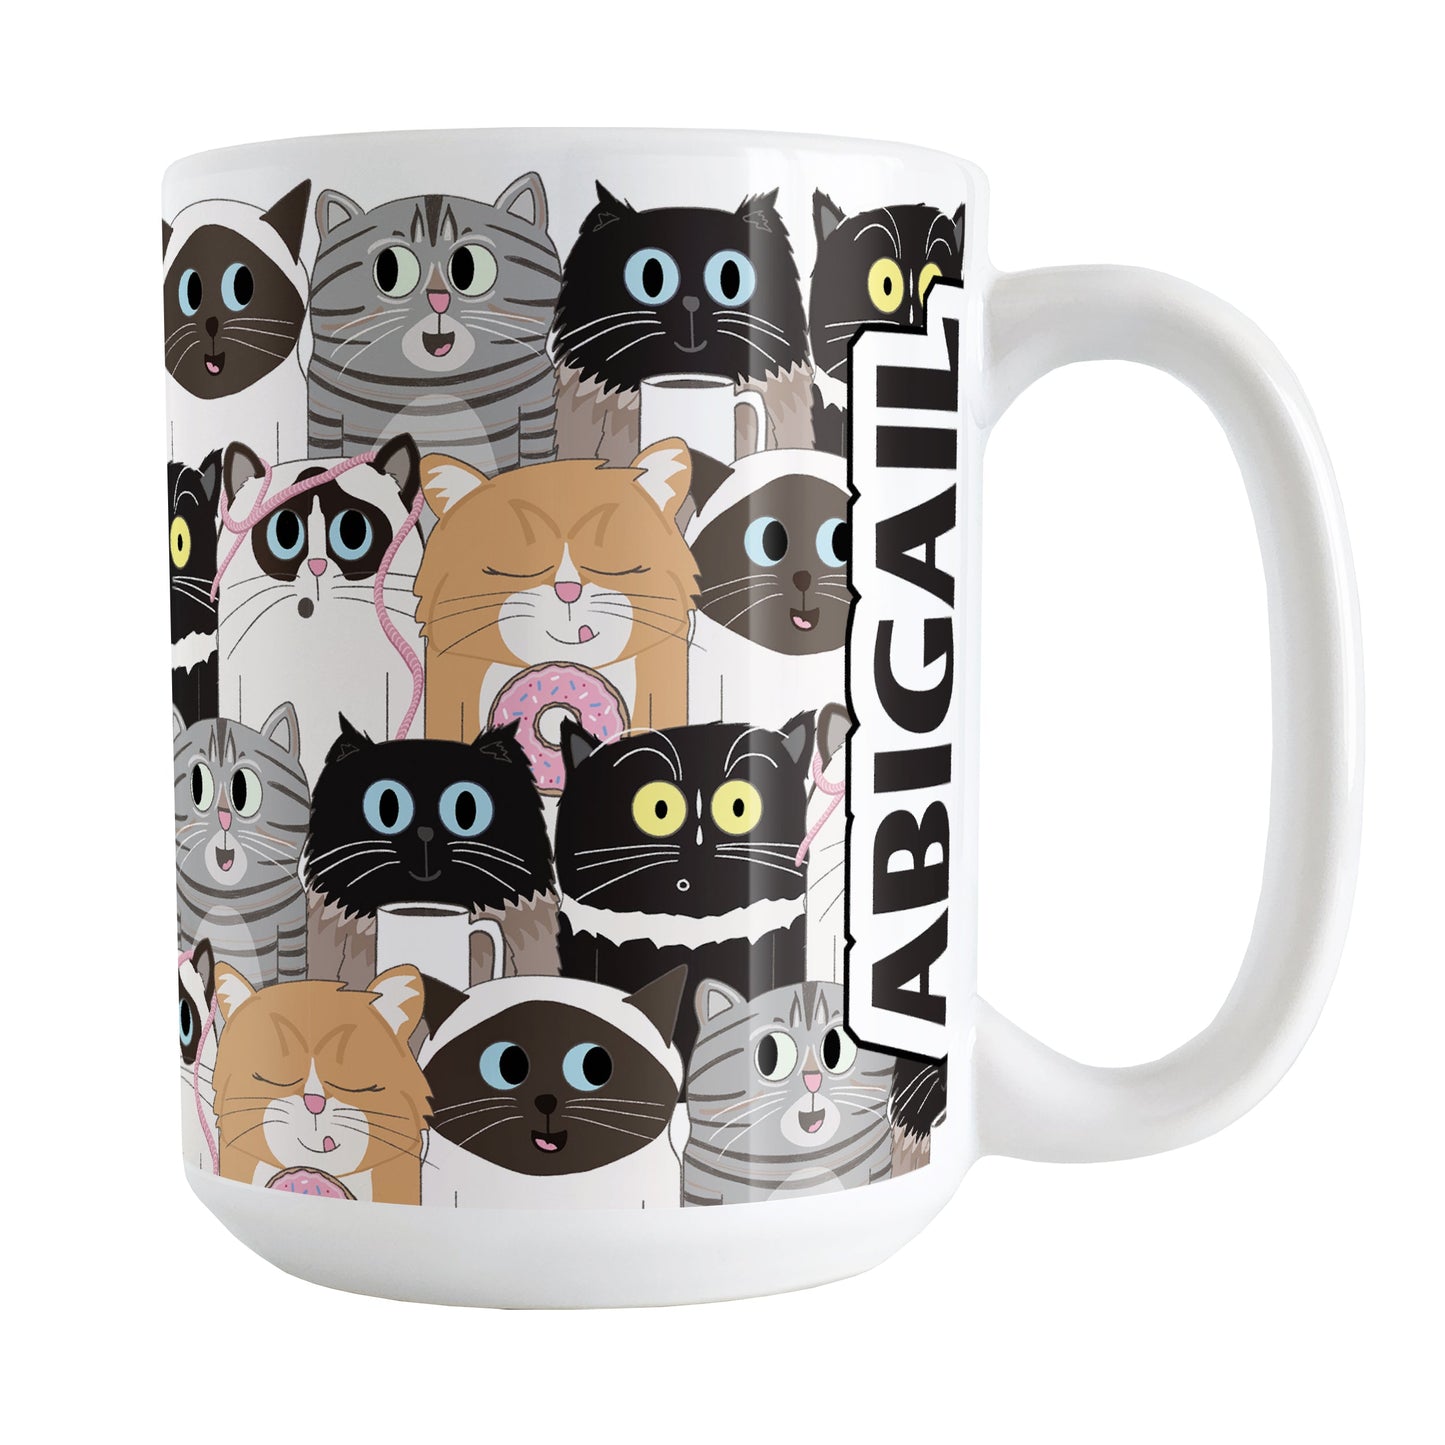 Personalized Cute Cat Stack Pattern Mug (15oz) at Amy's Coffee Mugs. A ceramic coffee mug designed with an illustrated pattern of different breeds of cats with different fun expressions, with yarn, coffee, and donuts. This stacked pattern of cats wraps around the ceramic mug to the handle where your name is custom printed in black on white vertically at the edge of the design.